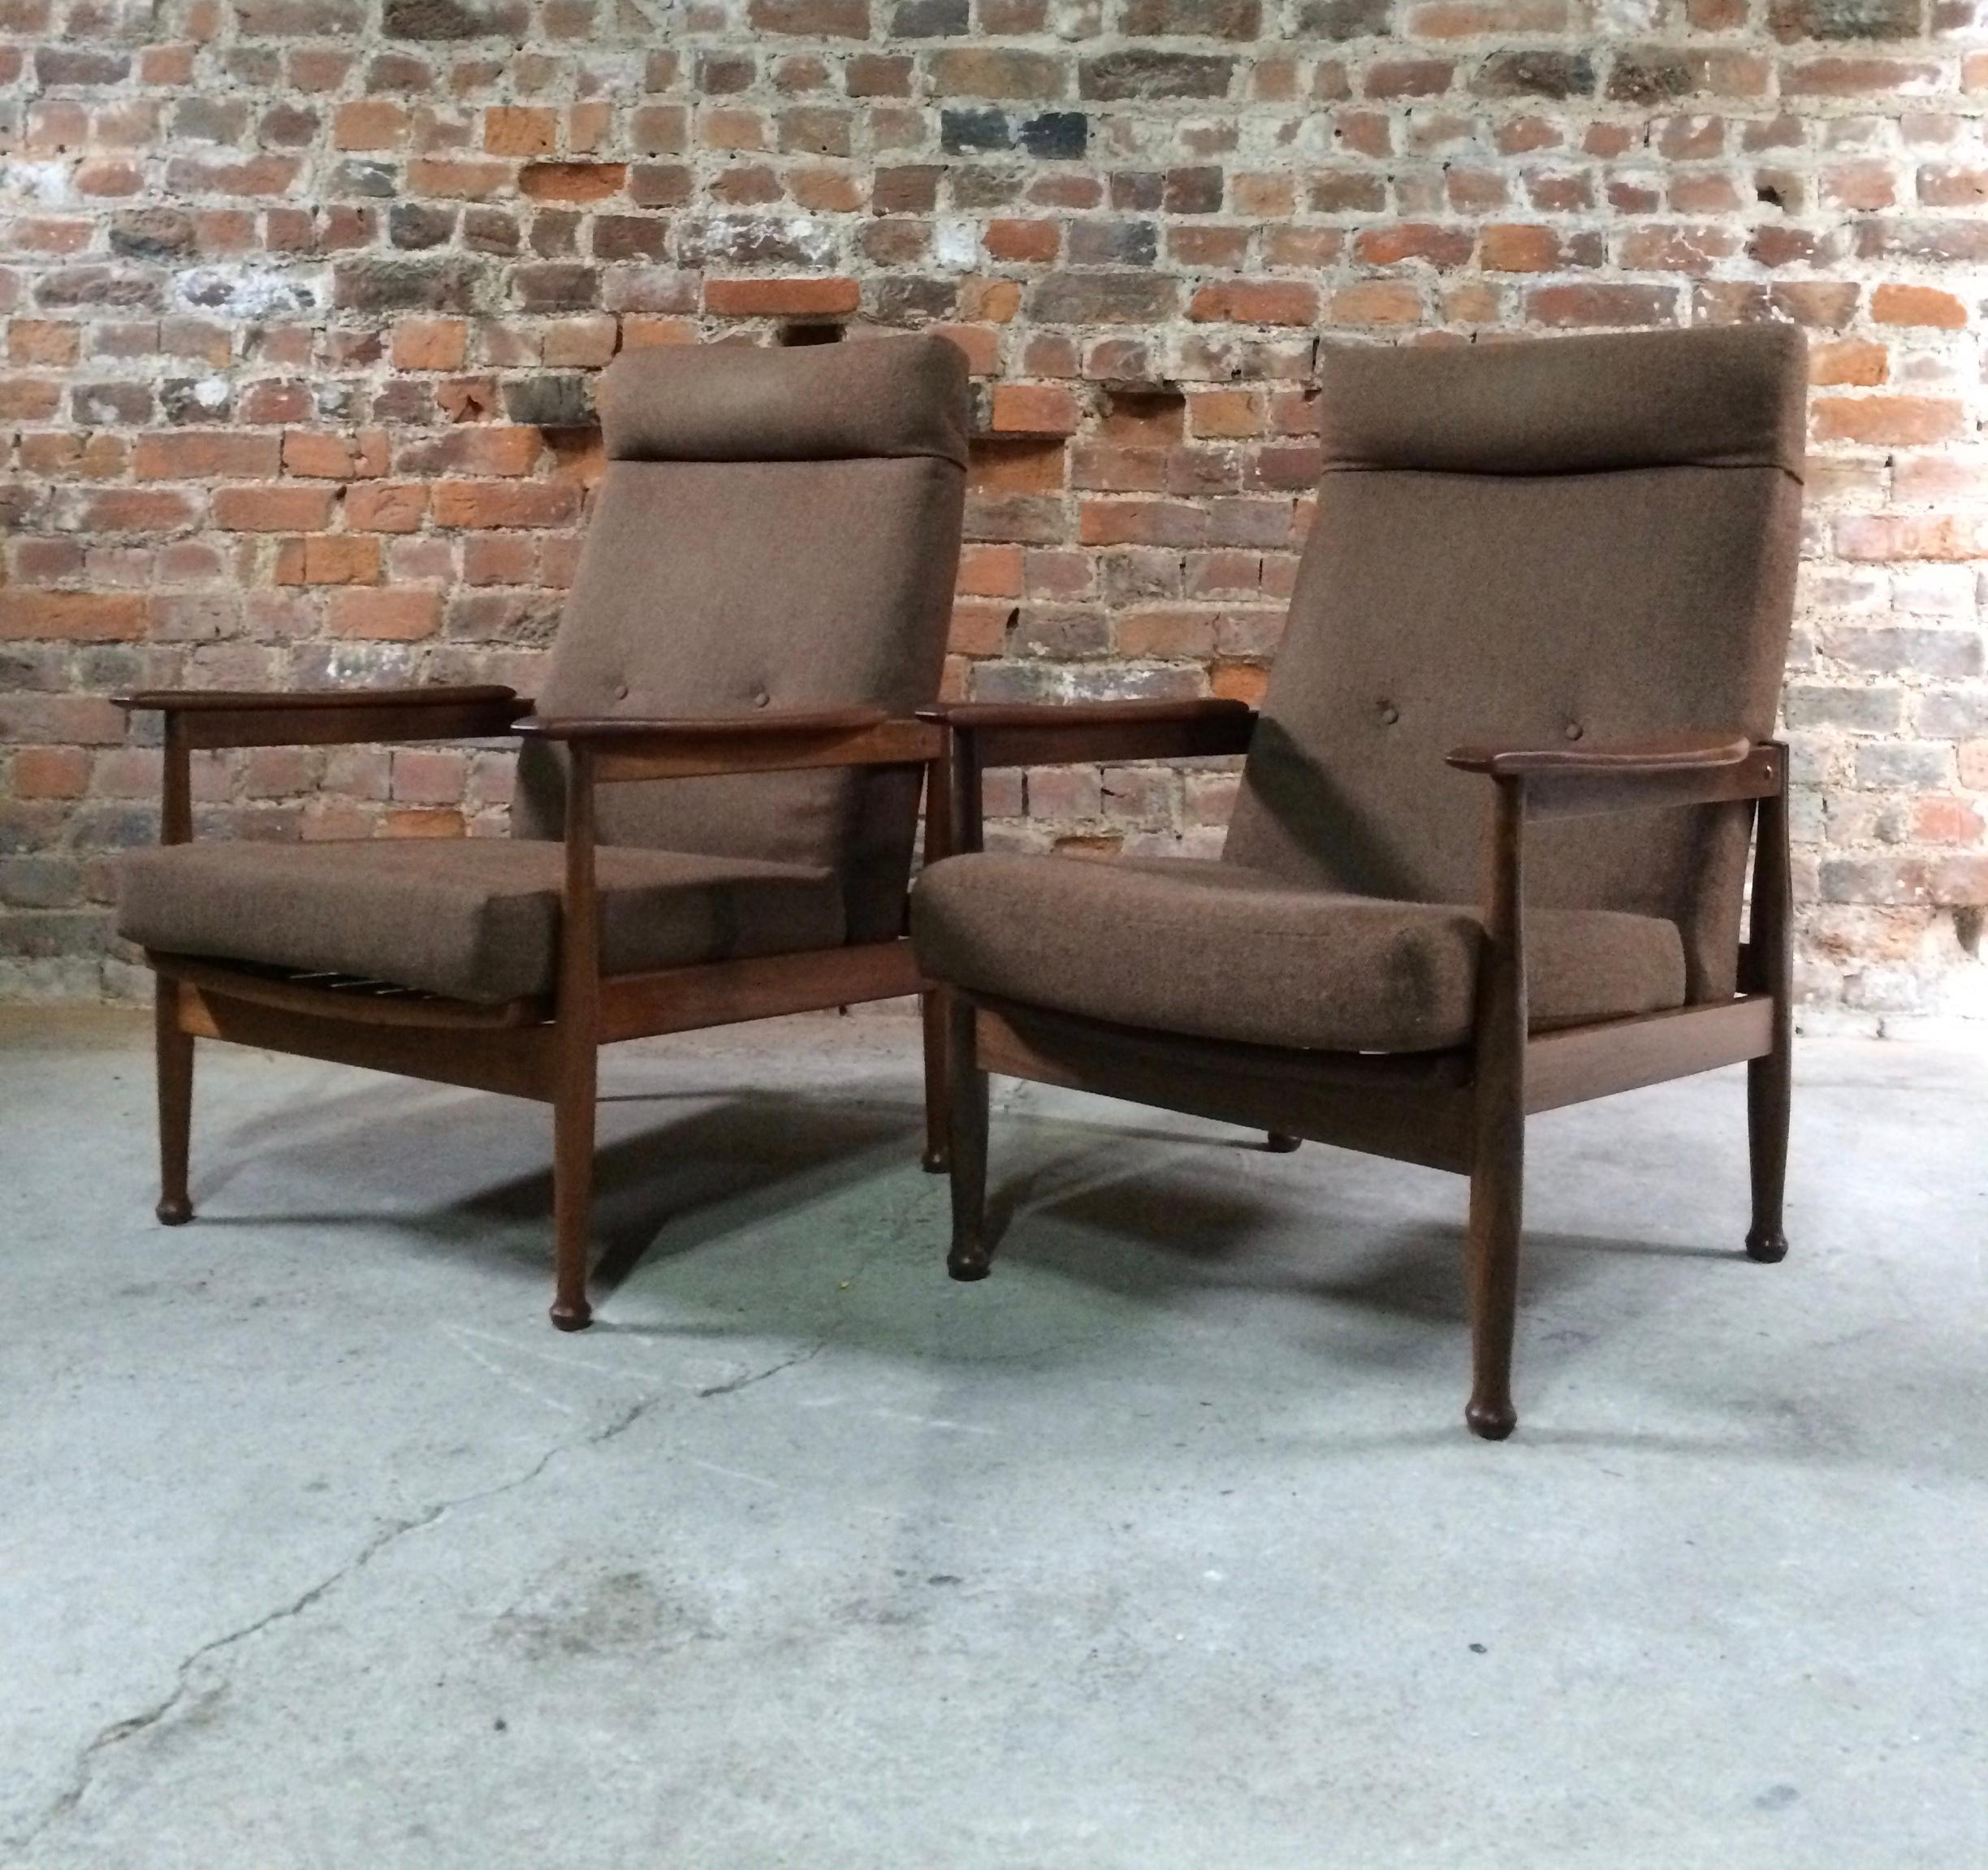 Magnificent Pair of Guy Rogers Style Teak Recliner Armchairs Manhattan Design 1